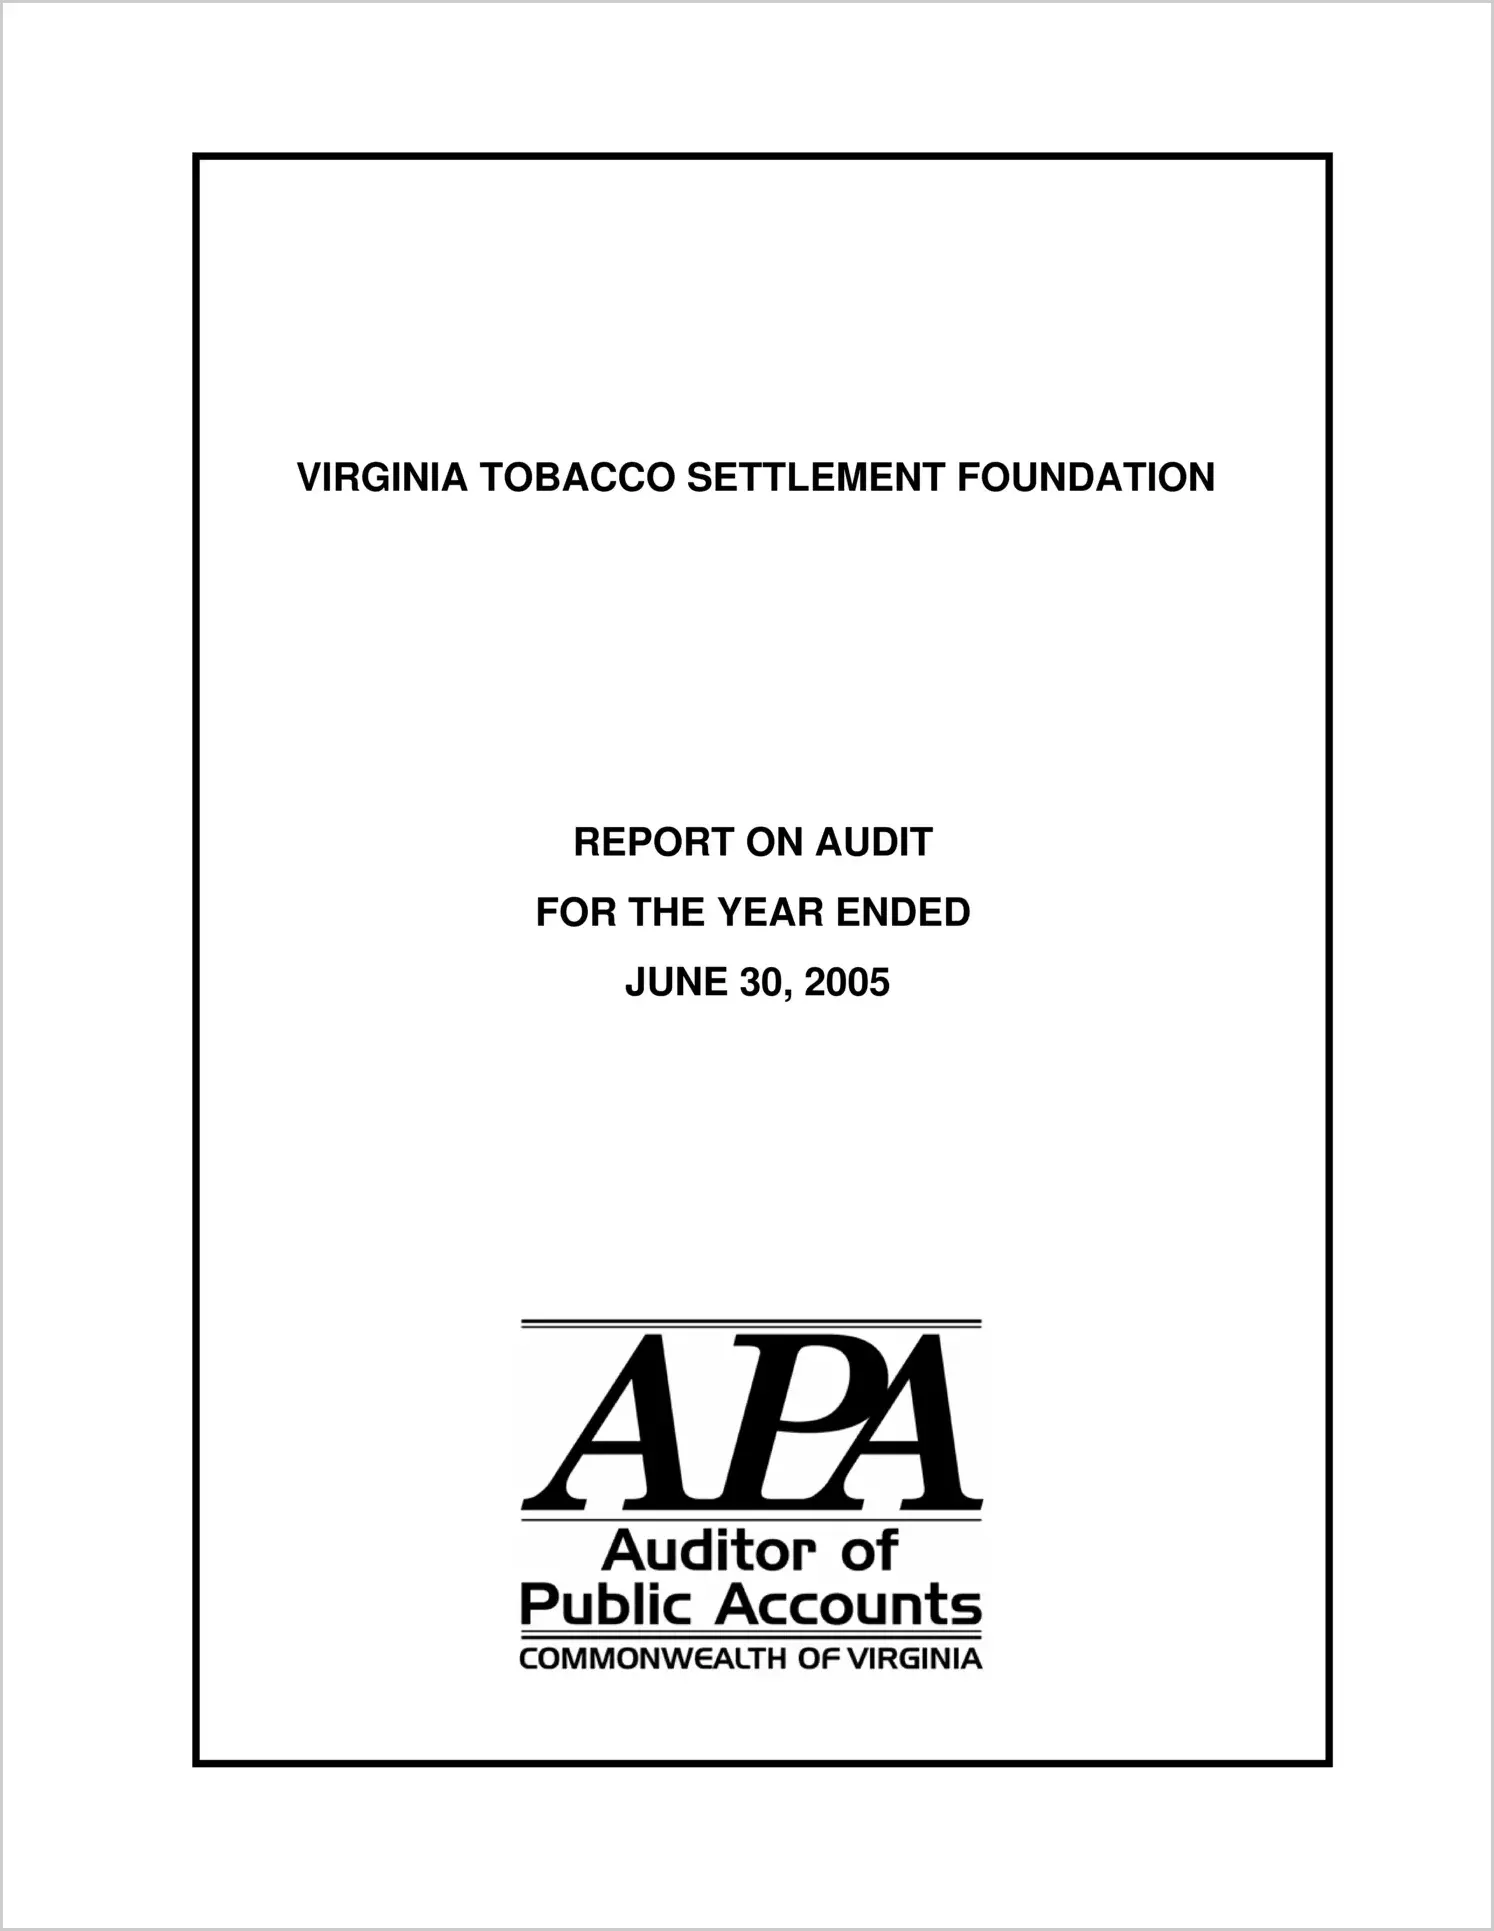 Virginia Tobacco Settlement Foundation for the year ended June 30, 2005